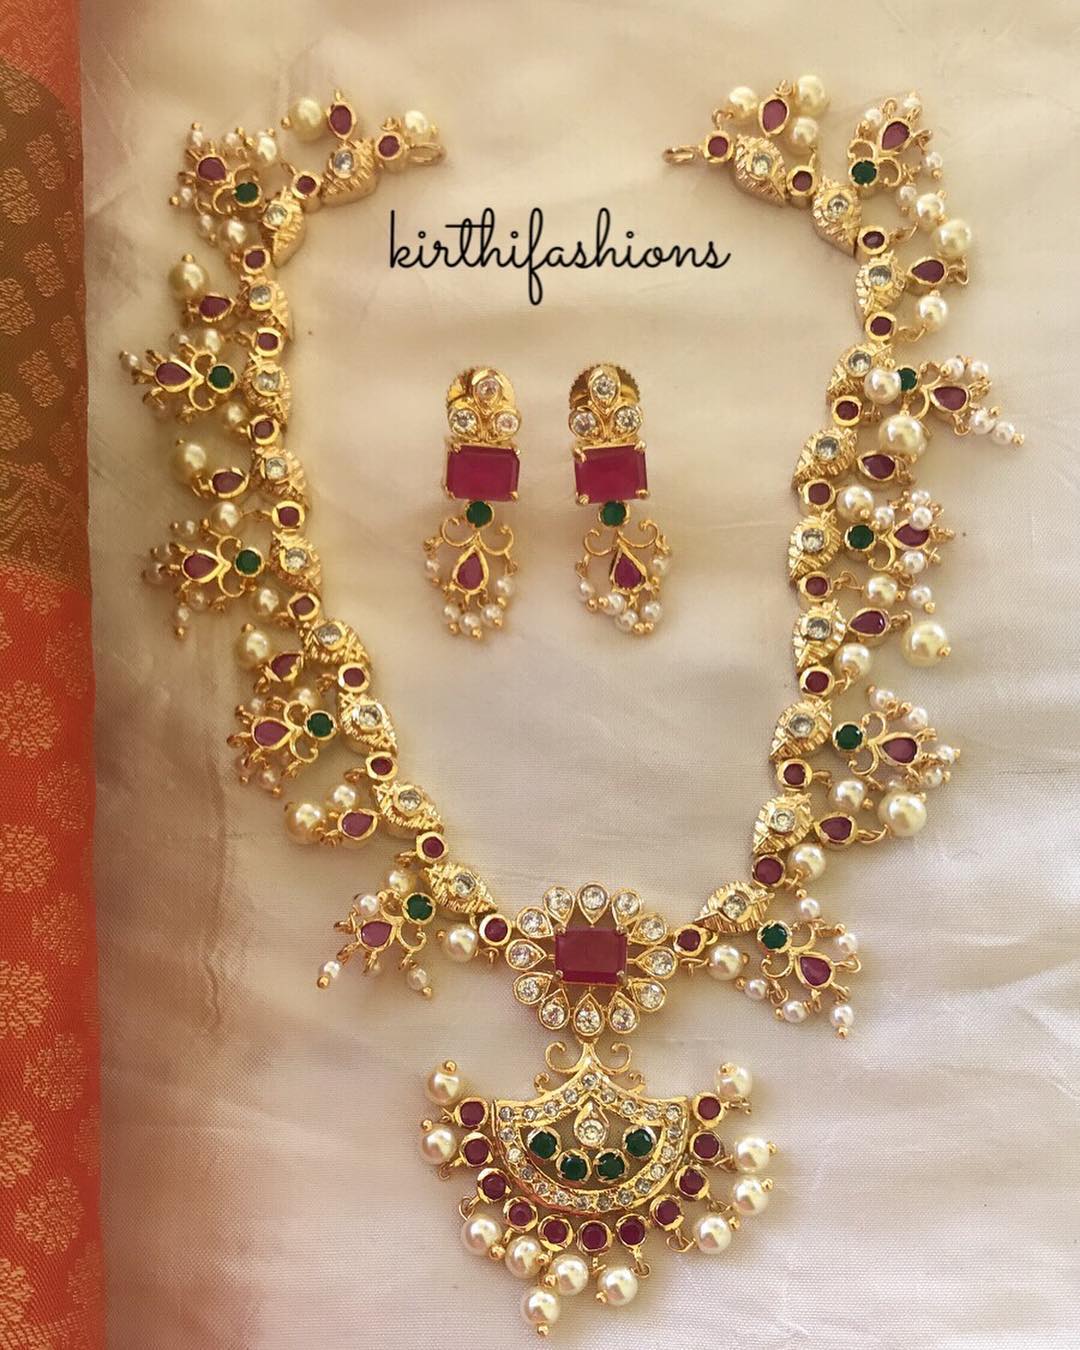 Adorable Matt Necklace Set From Krithi Fashions